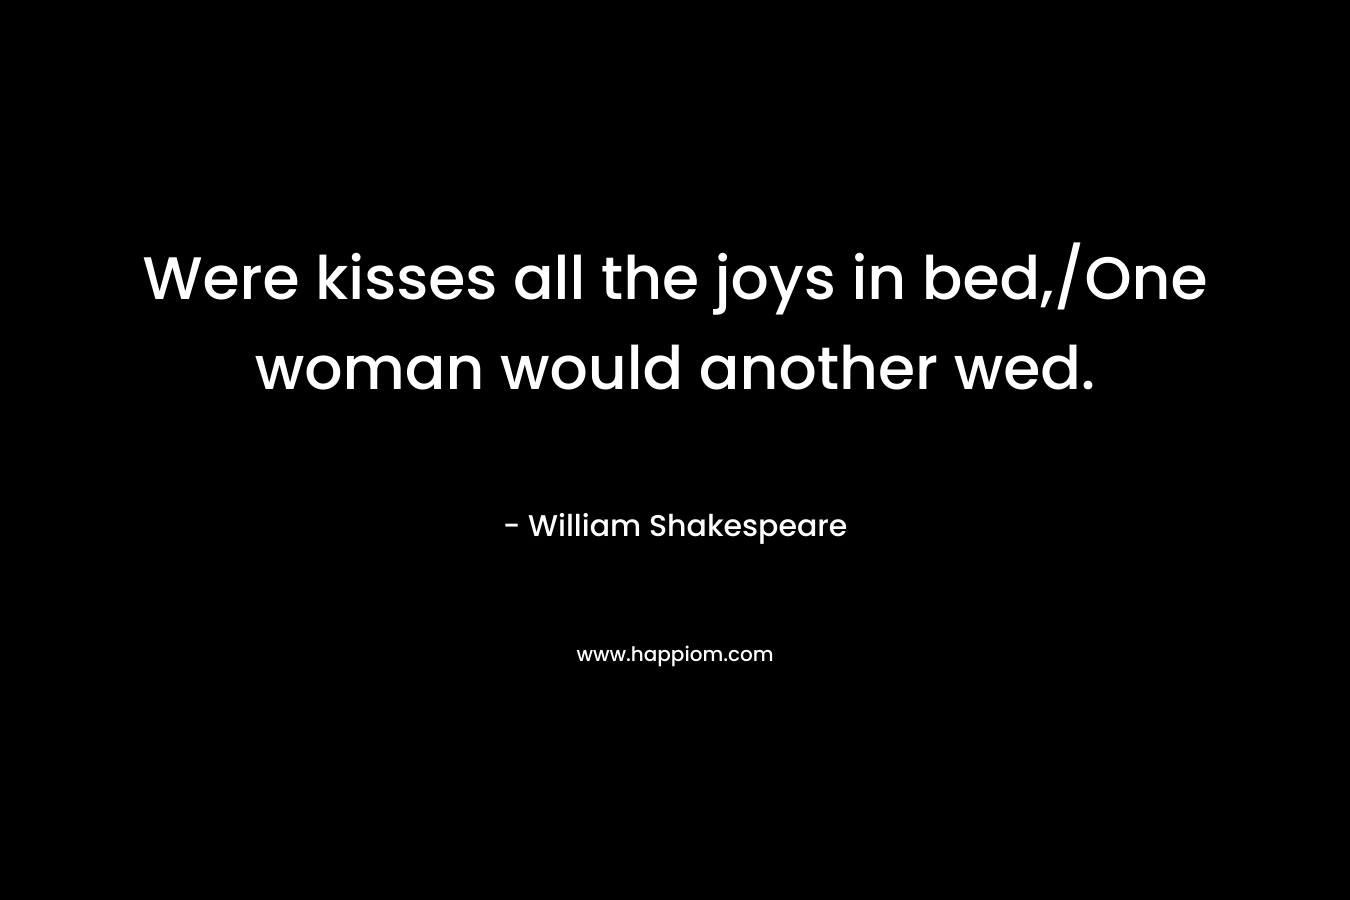 Were kisses all the joys in bed,/One woman would another wed.